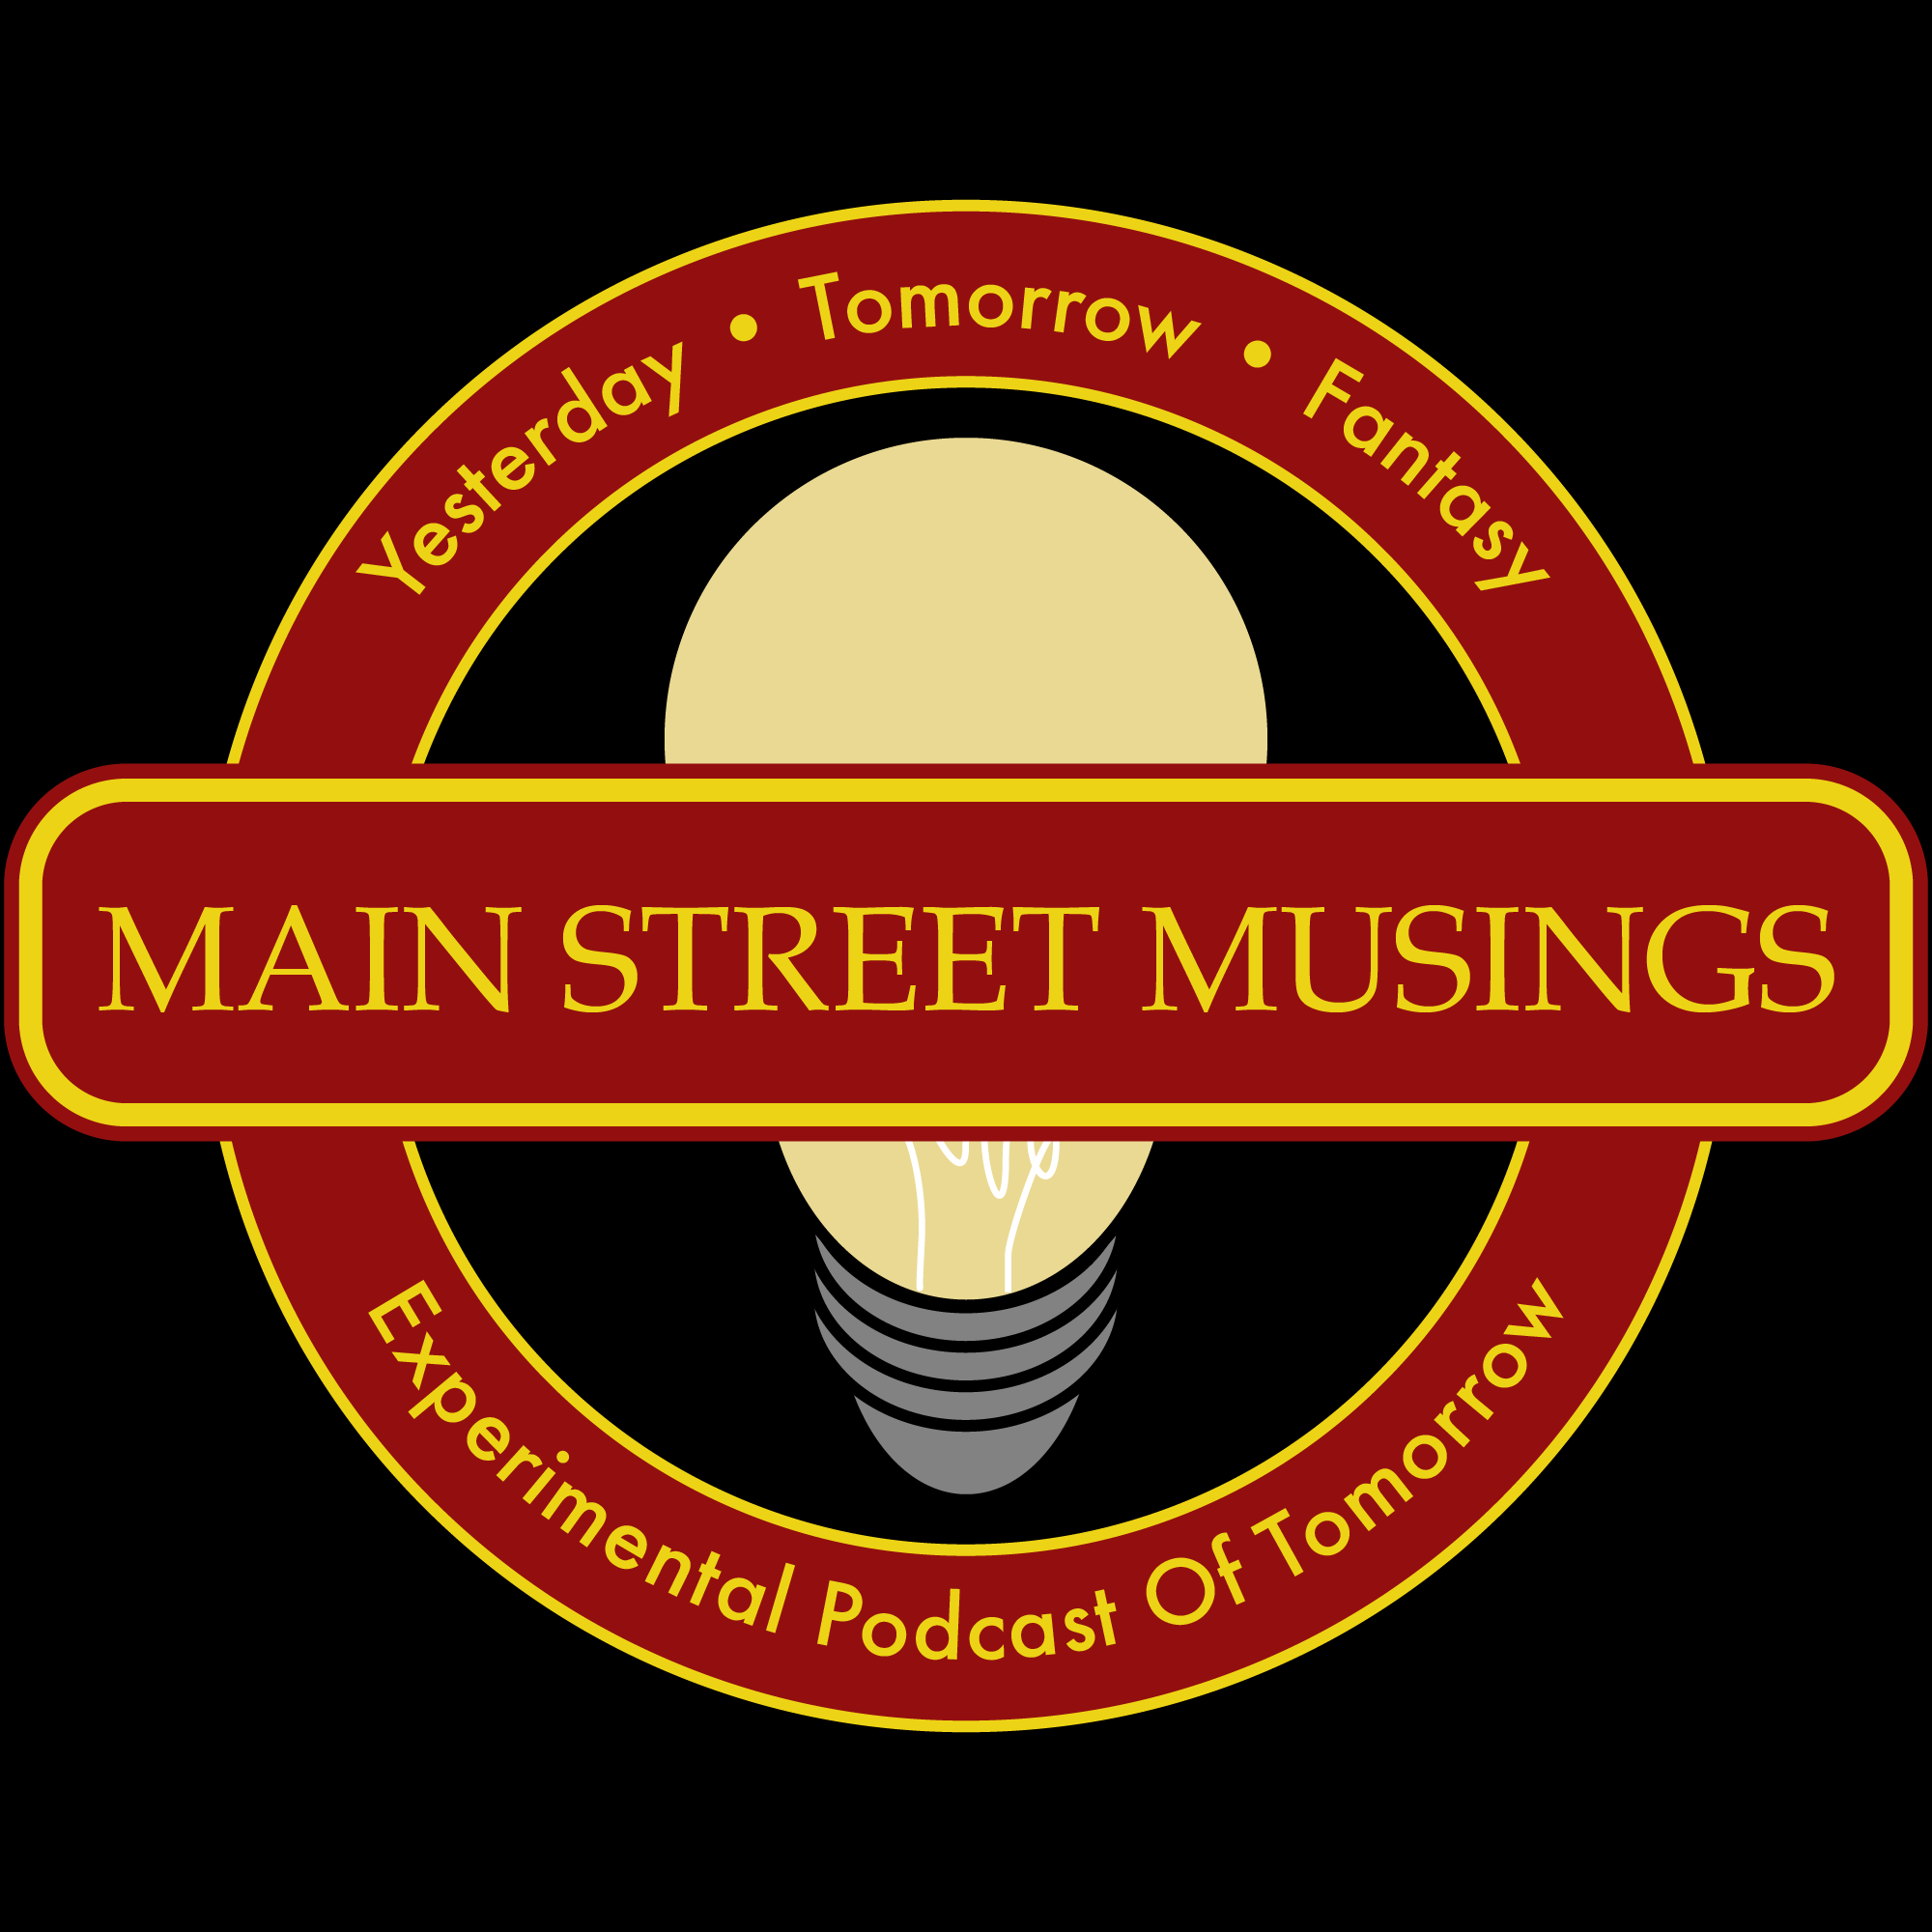 Main Street Musings: The Experimental Podcast of Tomorrow